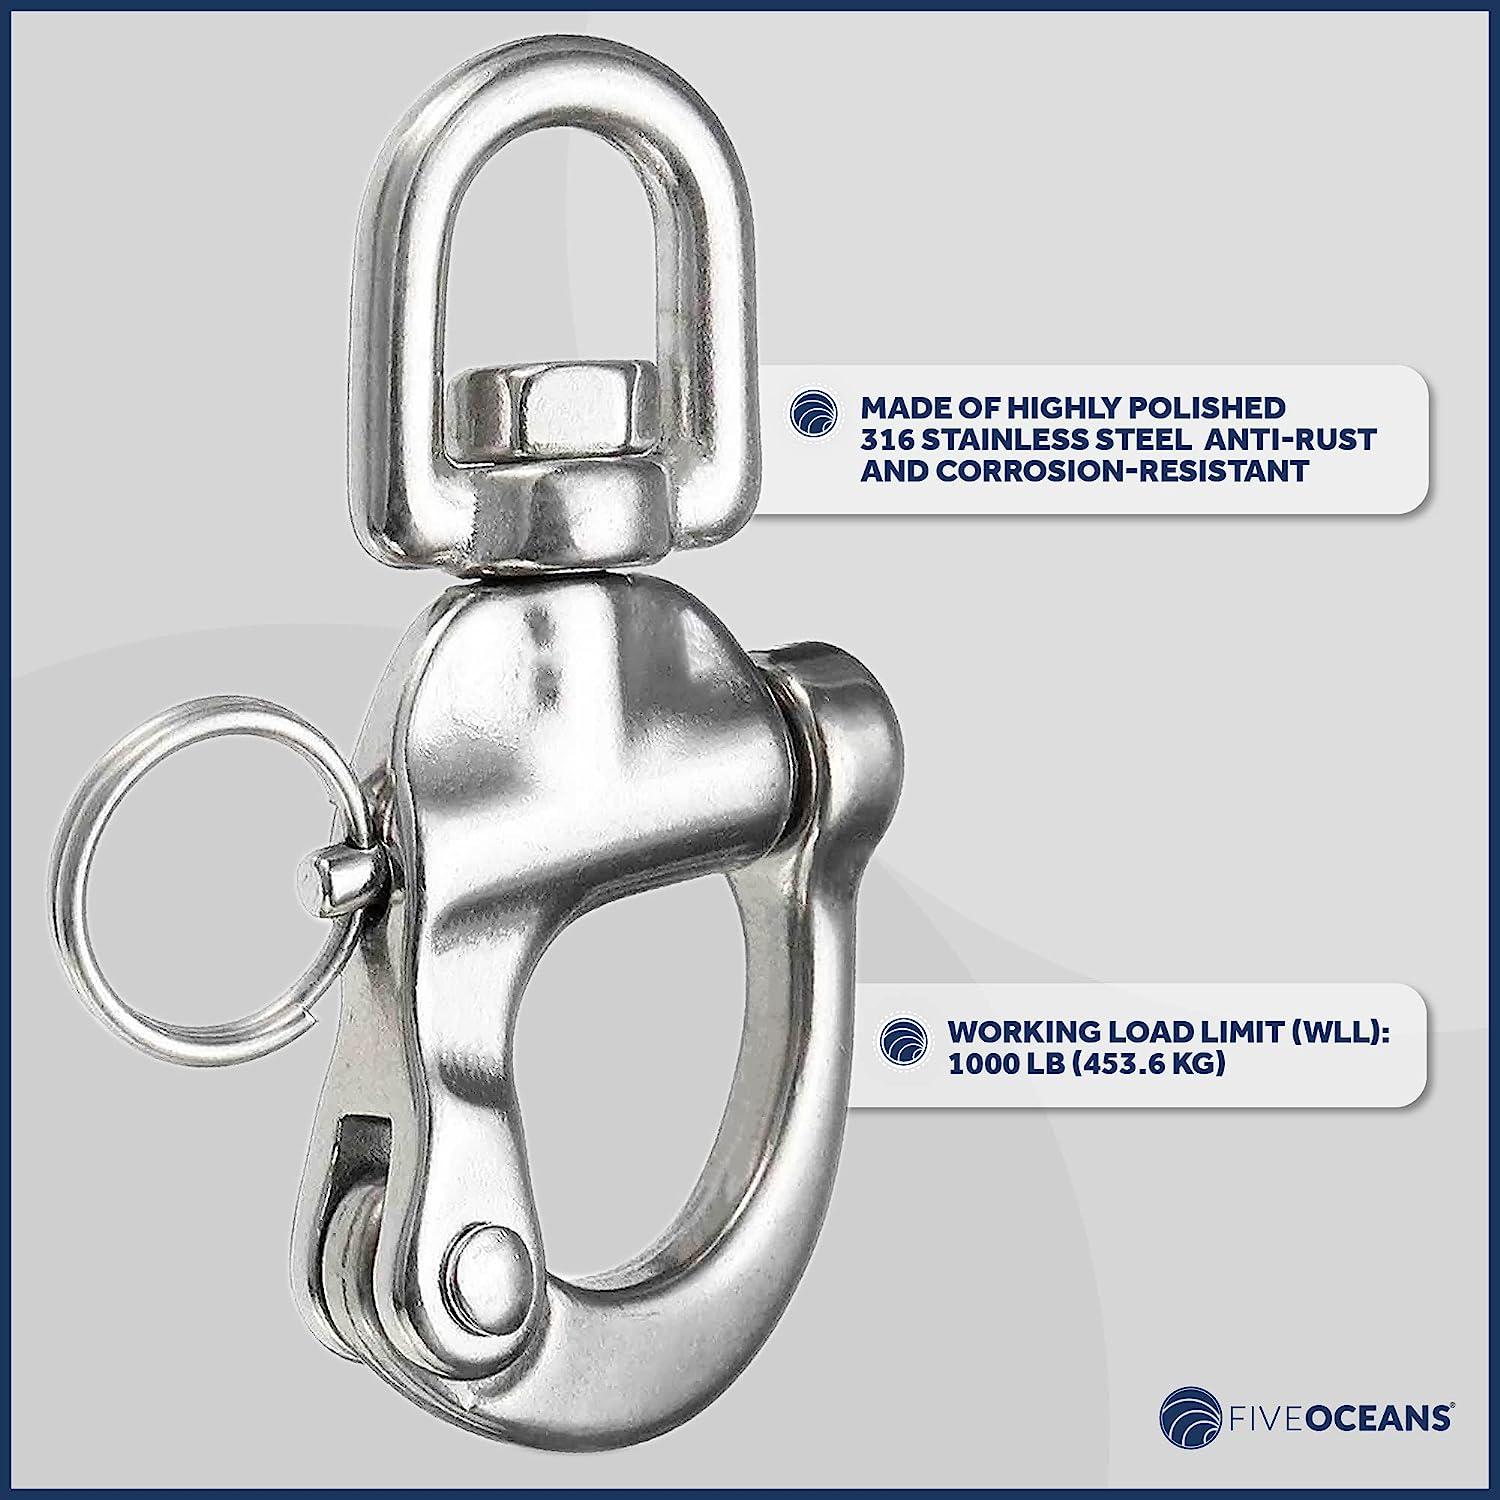 Five Oceans Swivel Eye Snap Shackle Quick Release Bail Rigging for